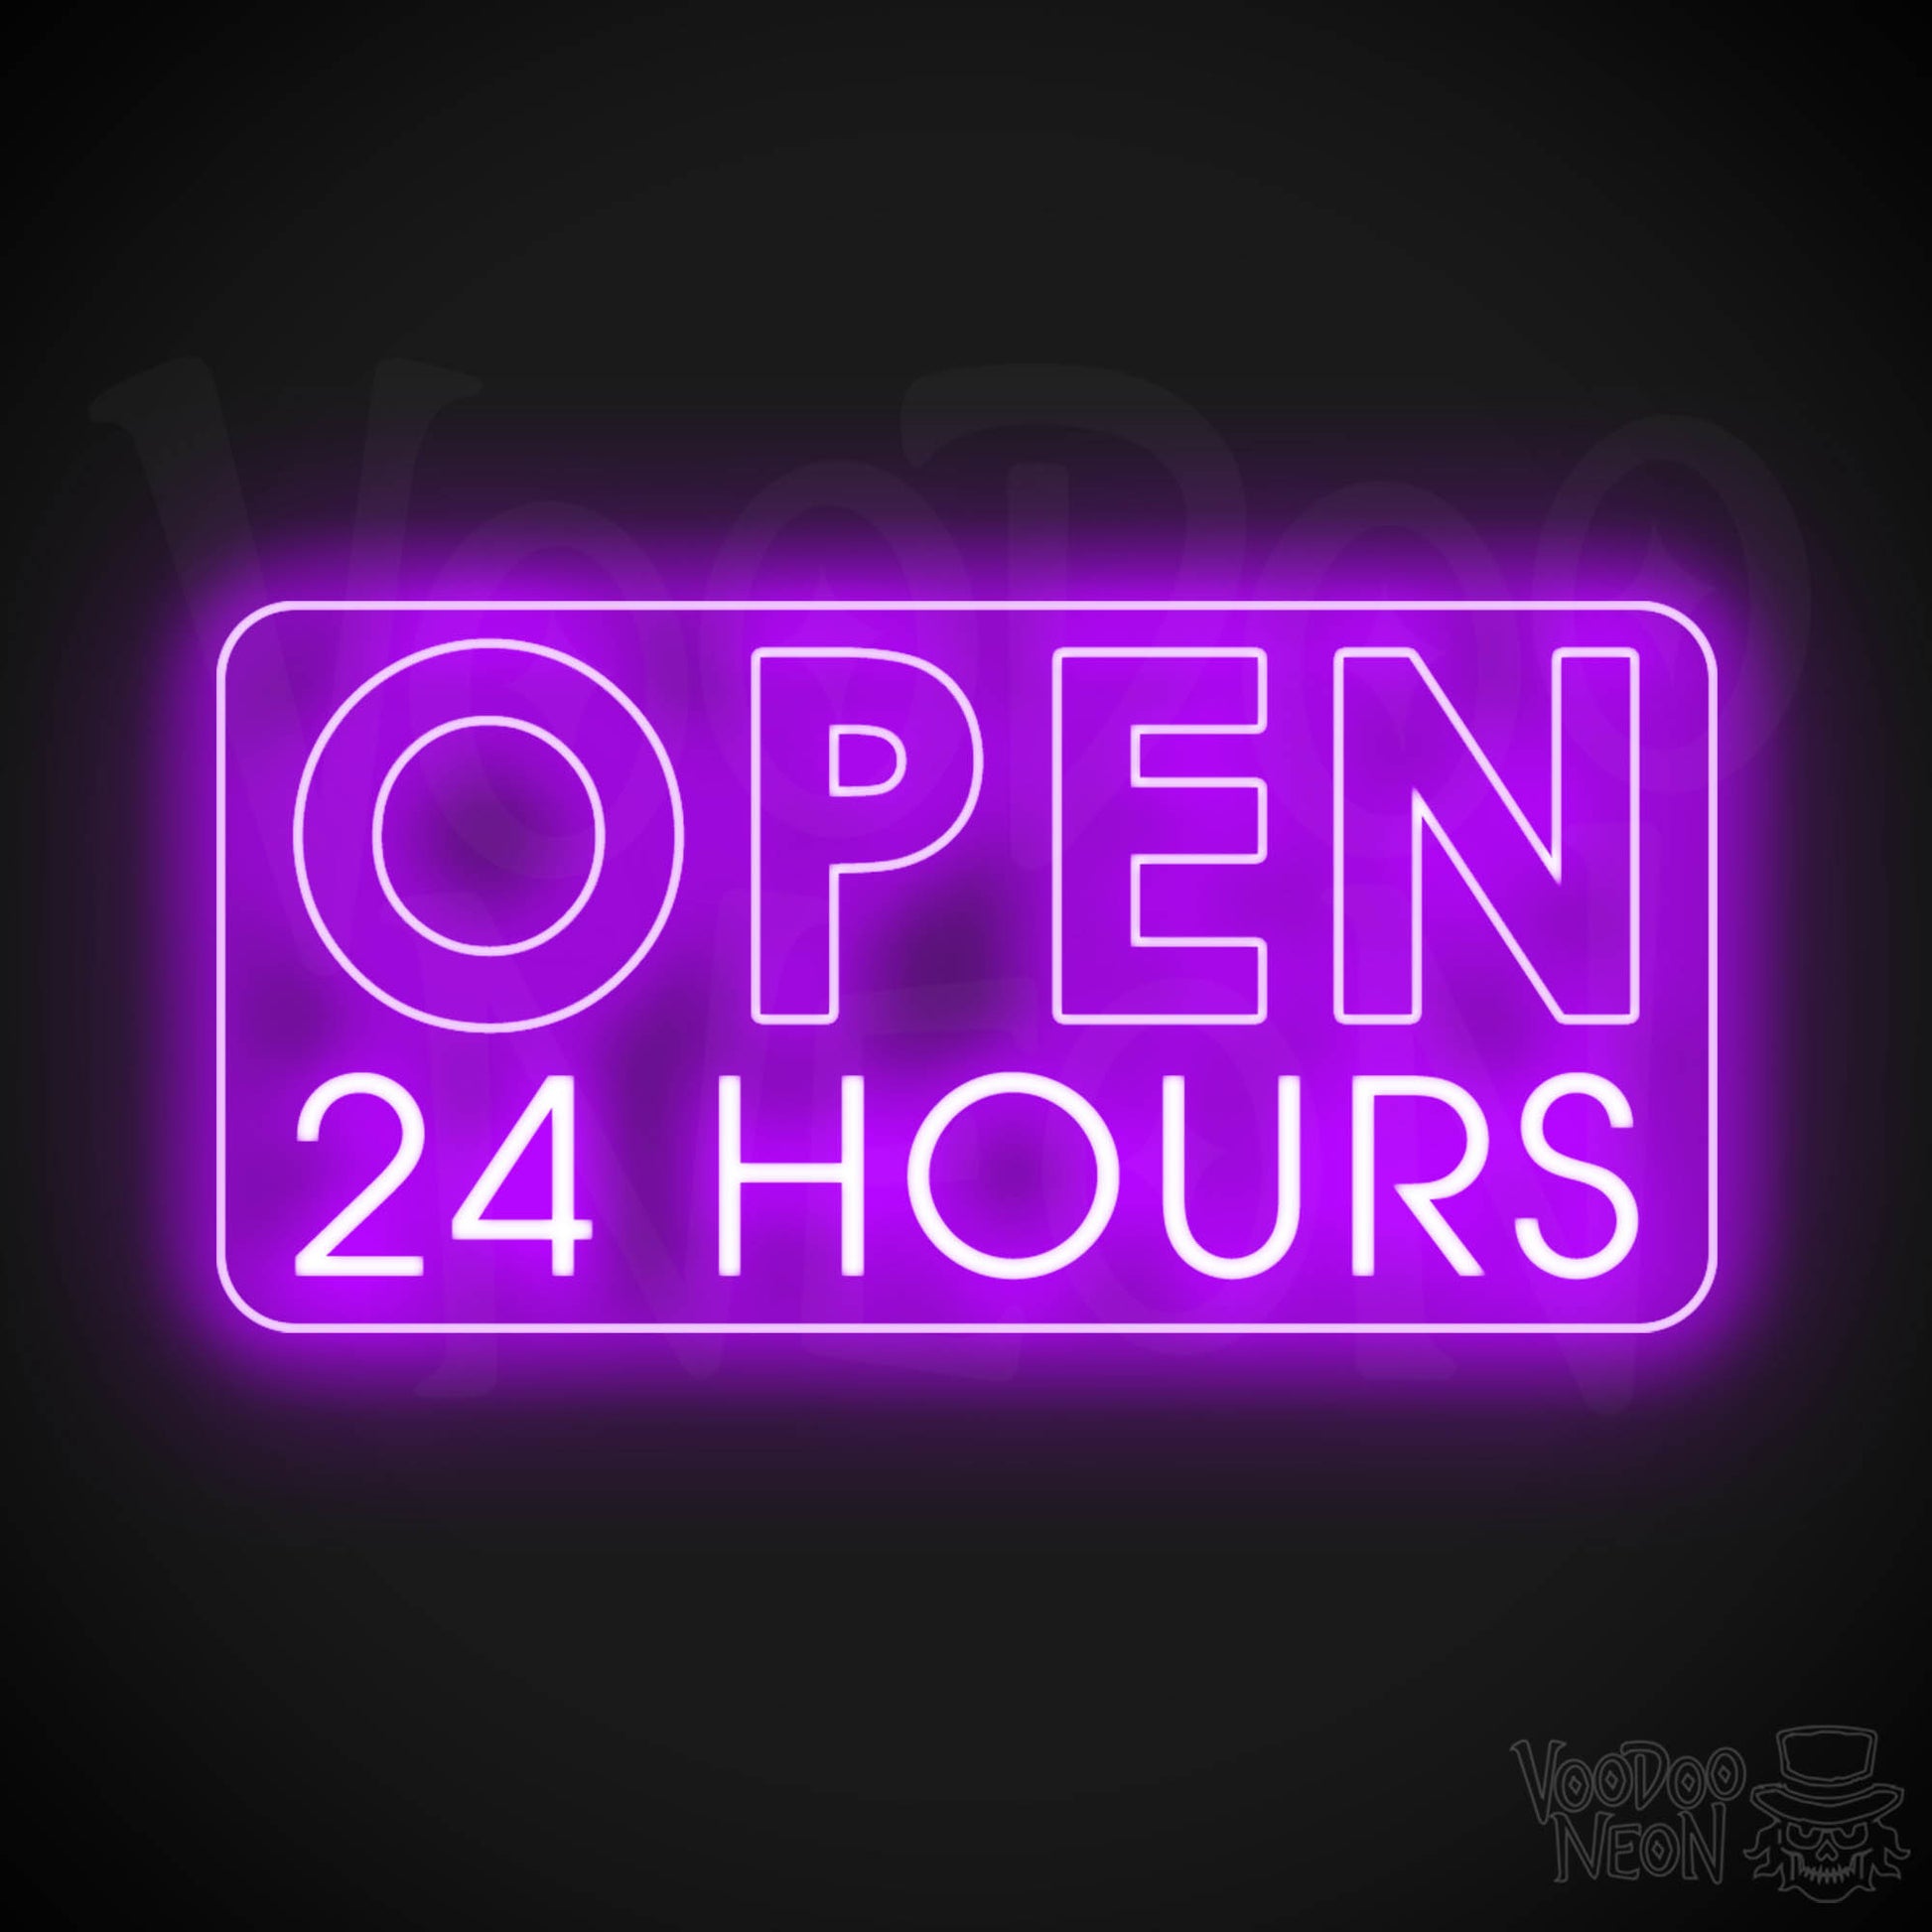 Open 24 Hours Neon Sign - Neon Open 24 Hours Sign - Shop Signs - Color Purple